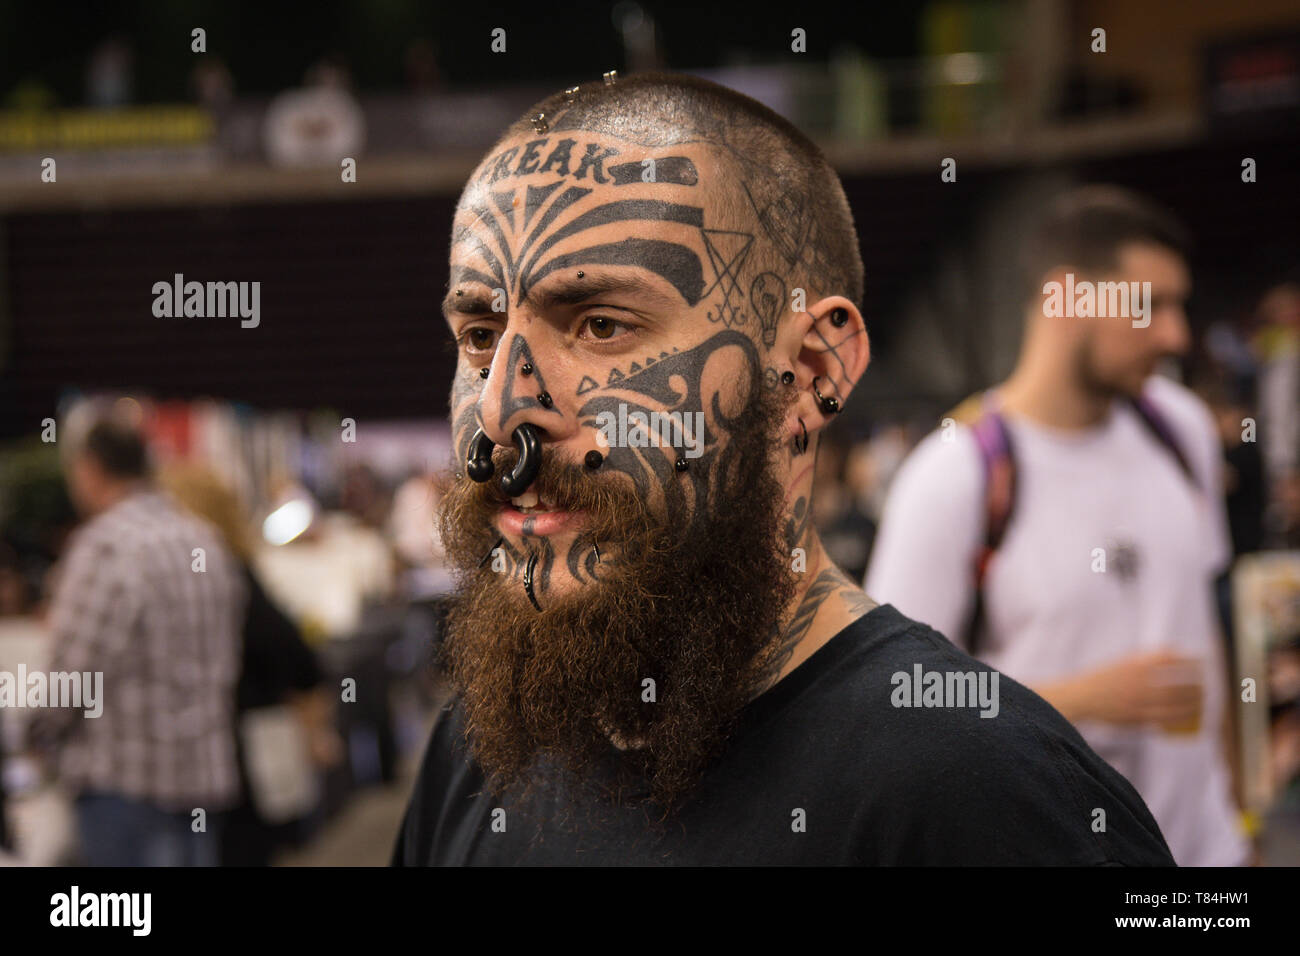 Athens, Greece. 10th May, 2019. A man seen with a full face tattoo during the festival.Thousands of tattoo artists all over the world took part during the 13th Athens International Tattoo Convention and they also made tattoos to people who were interested. Credit: Nikolas Joao Kokovlis/SOPA Images/ZUMA Wire/Alamy Live News Stock Photo